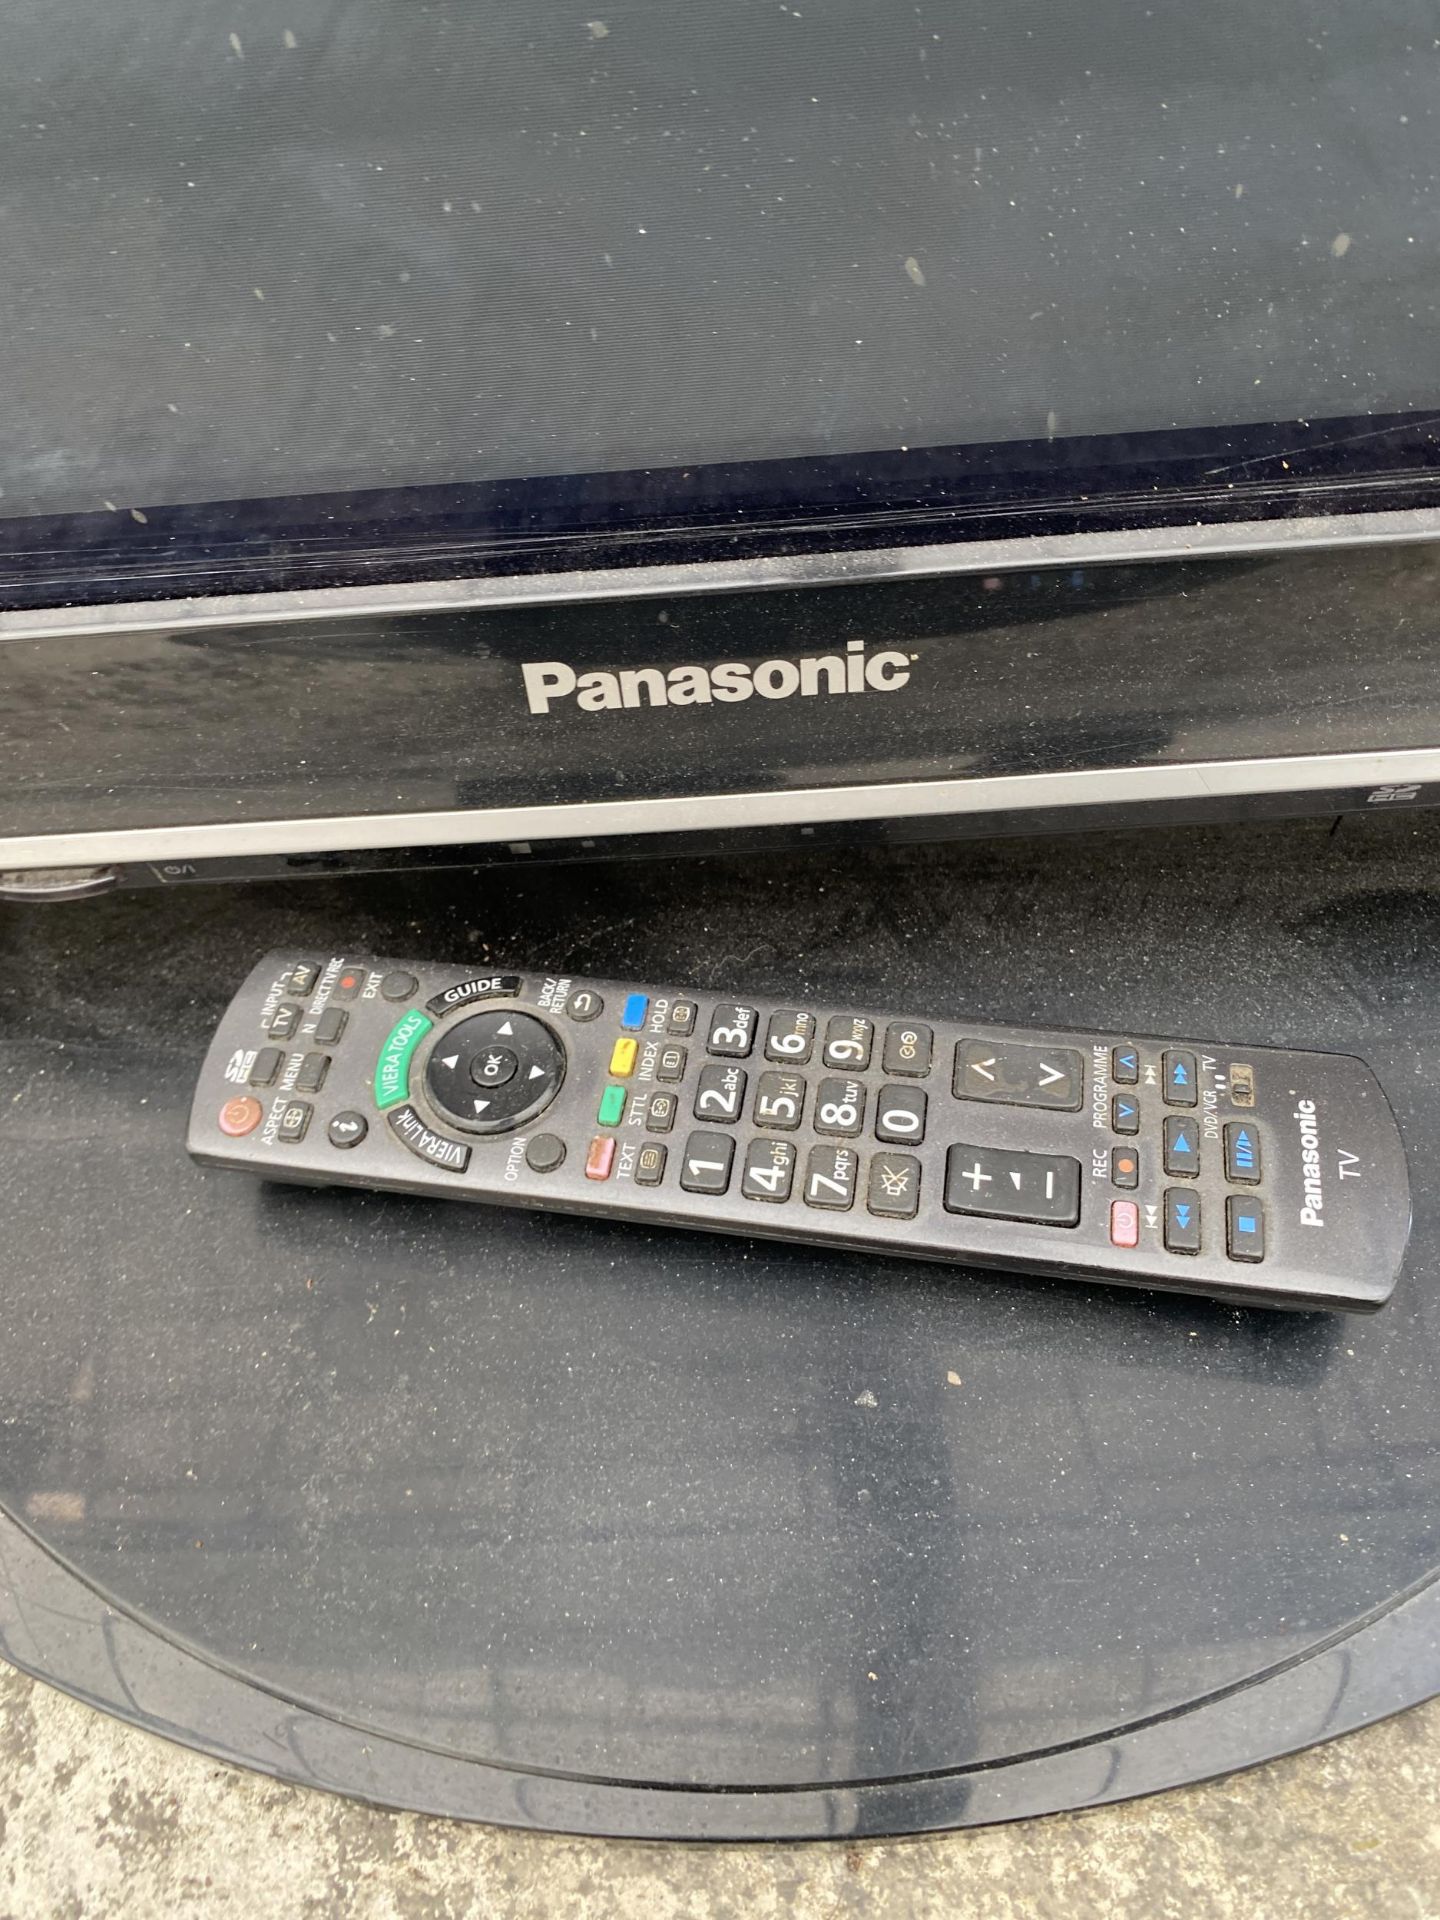 A PANASONIC 50" TELEVISION WITH REMOTE CONTROL BELIEVED IN WORKING ORDER BUT NO WARRANTY - Image 2 of 4